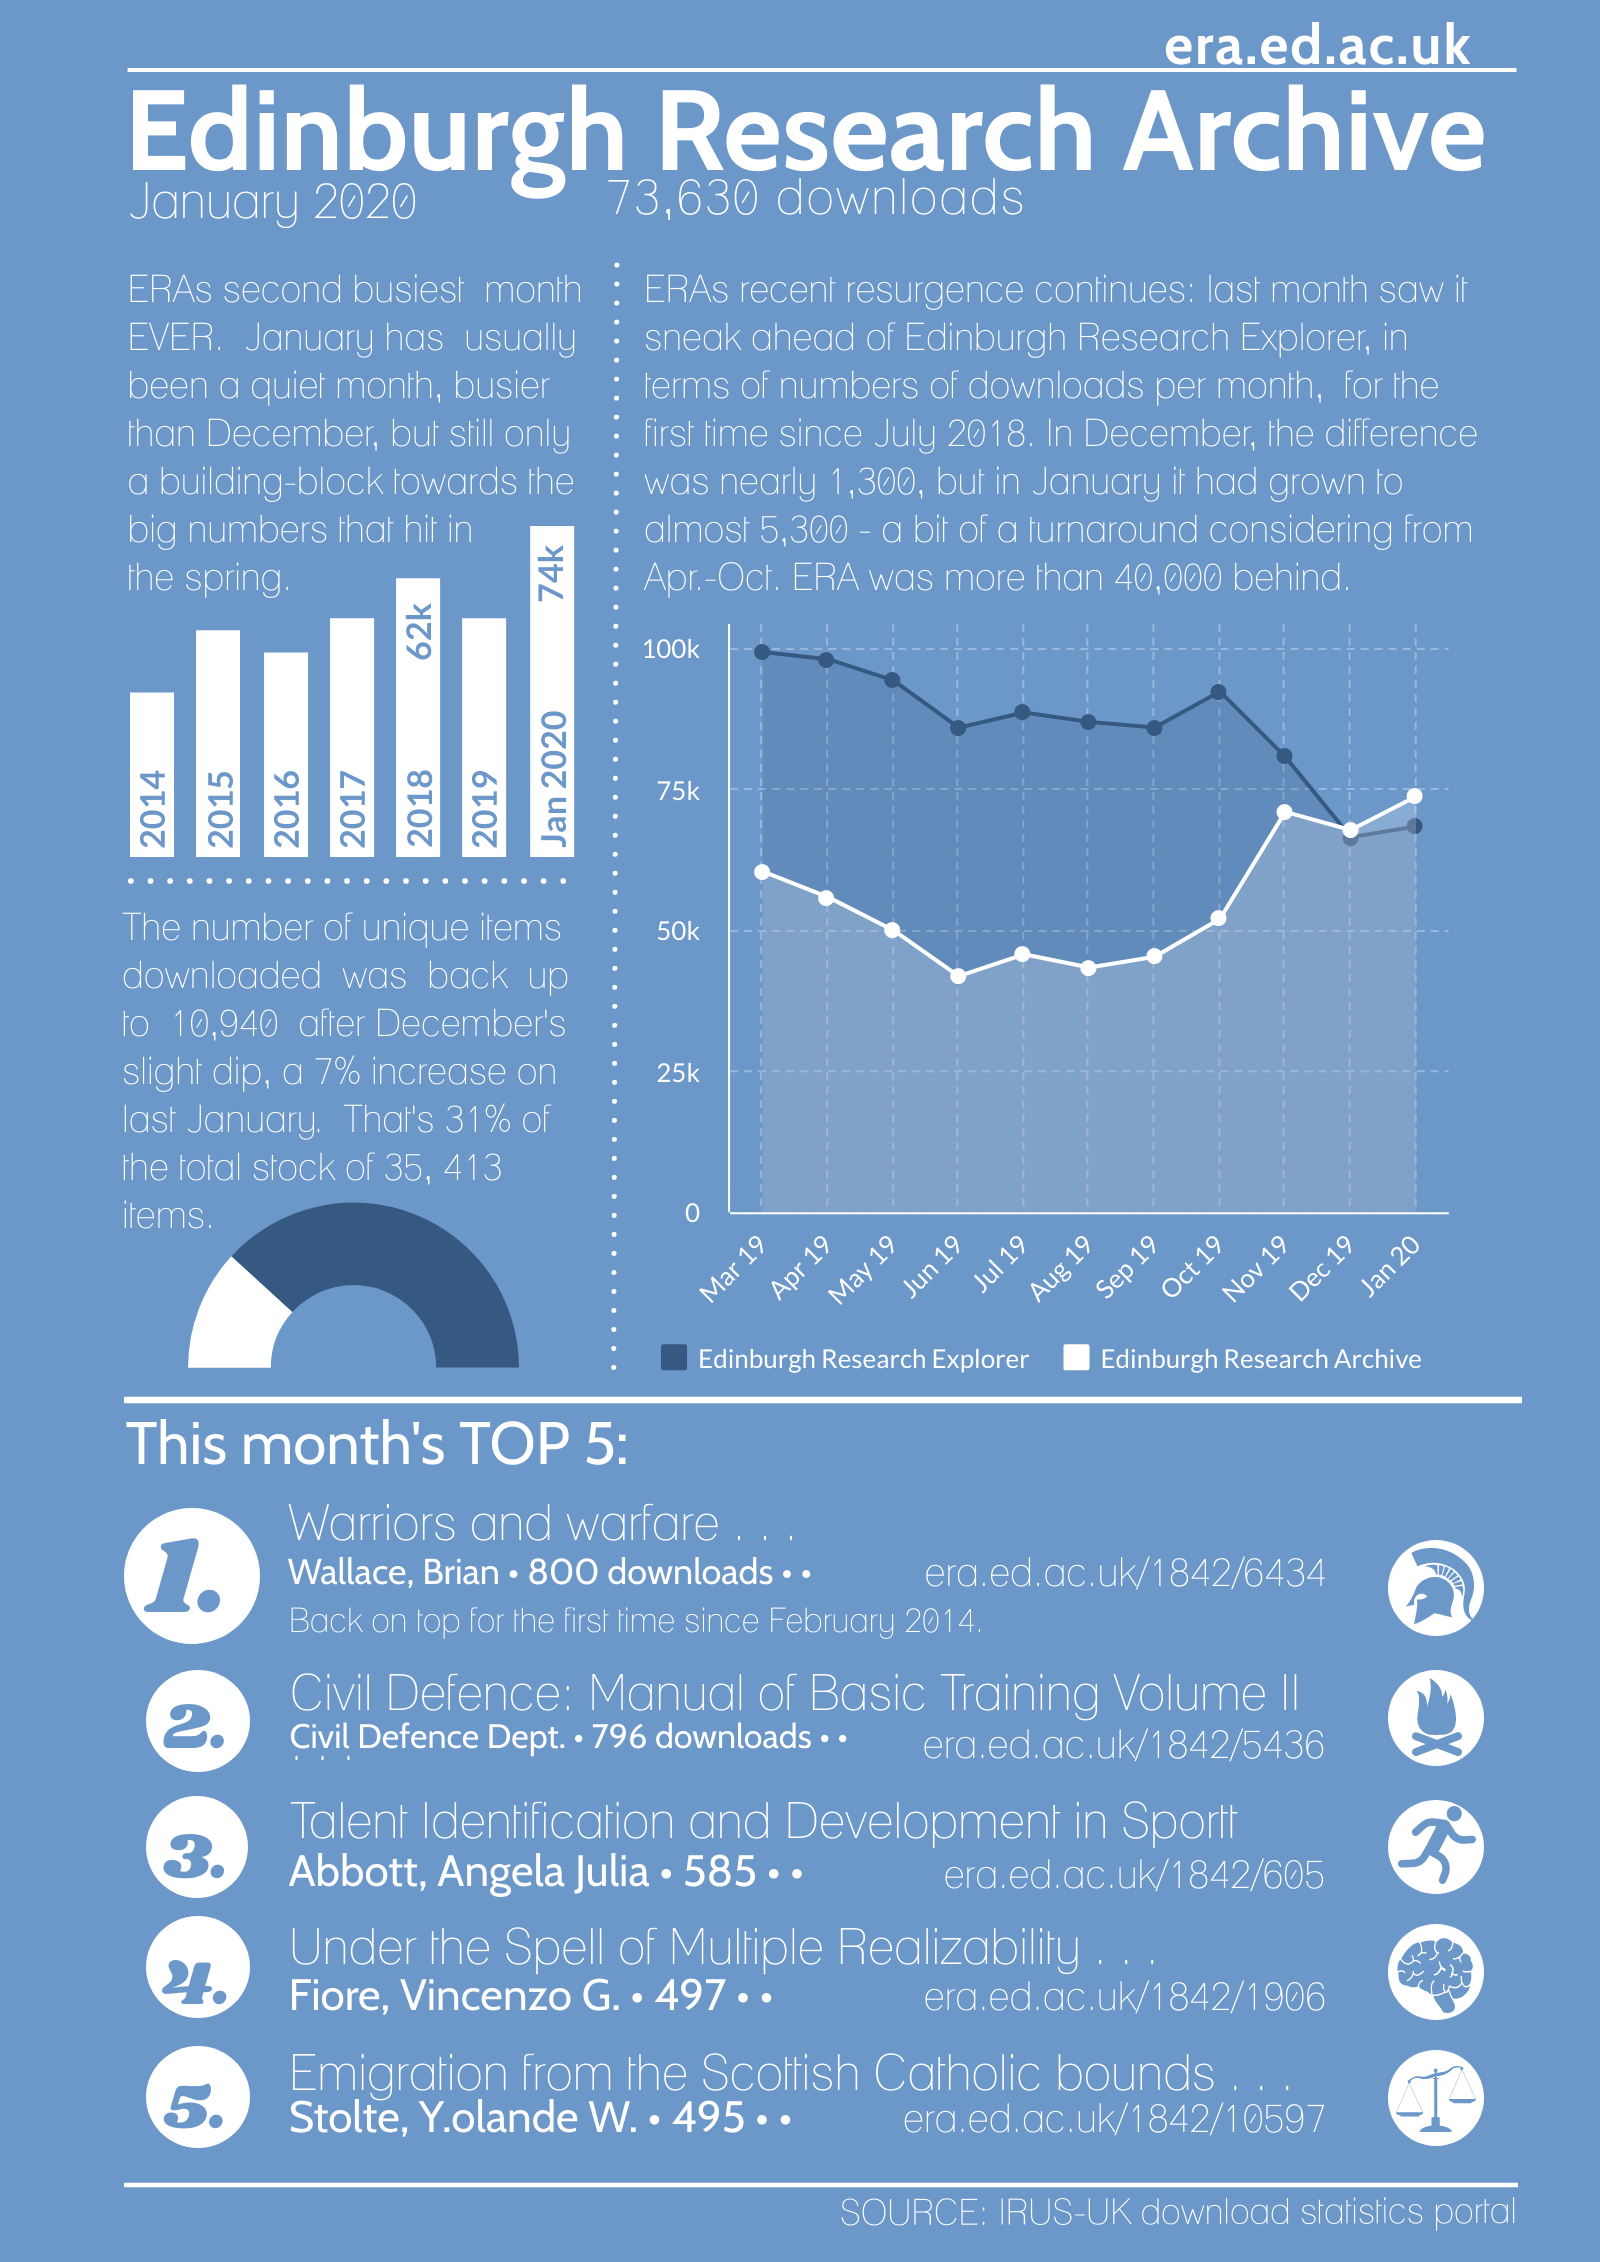 Edinburgh Research Archive: January 2020 downloads infographic